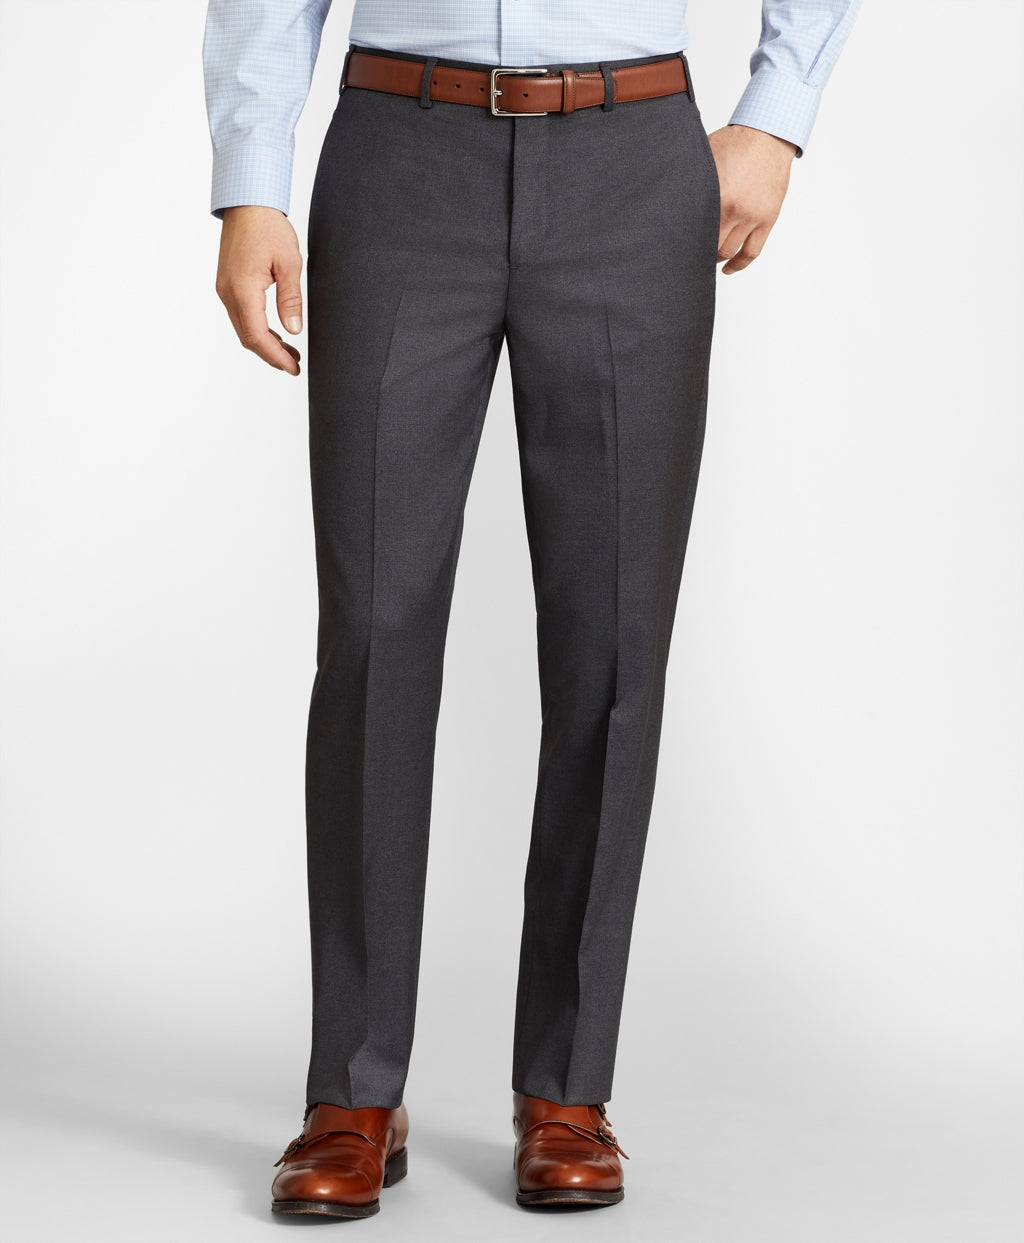 Men's Dress Trousers – Brooks Brothers Canada